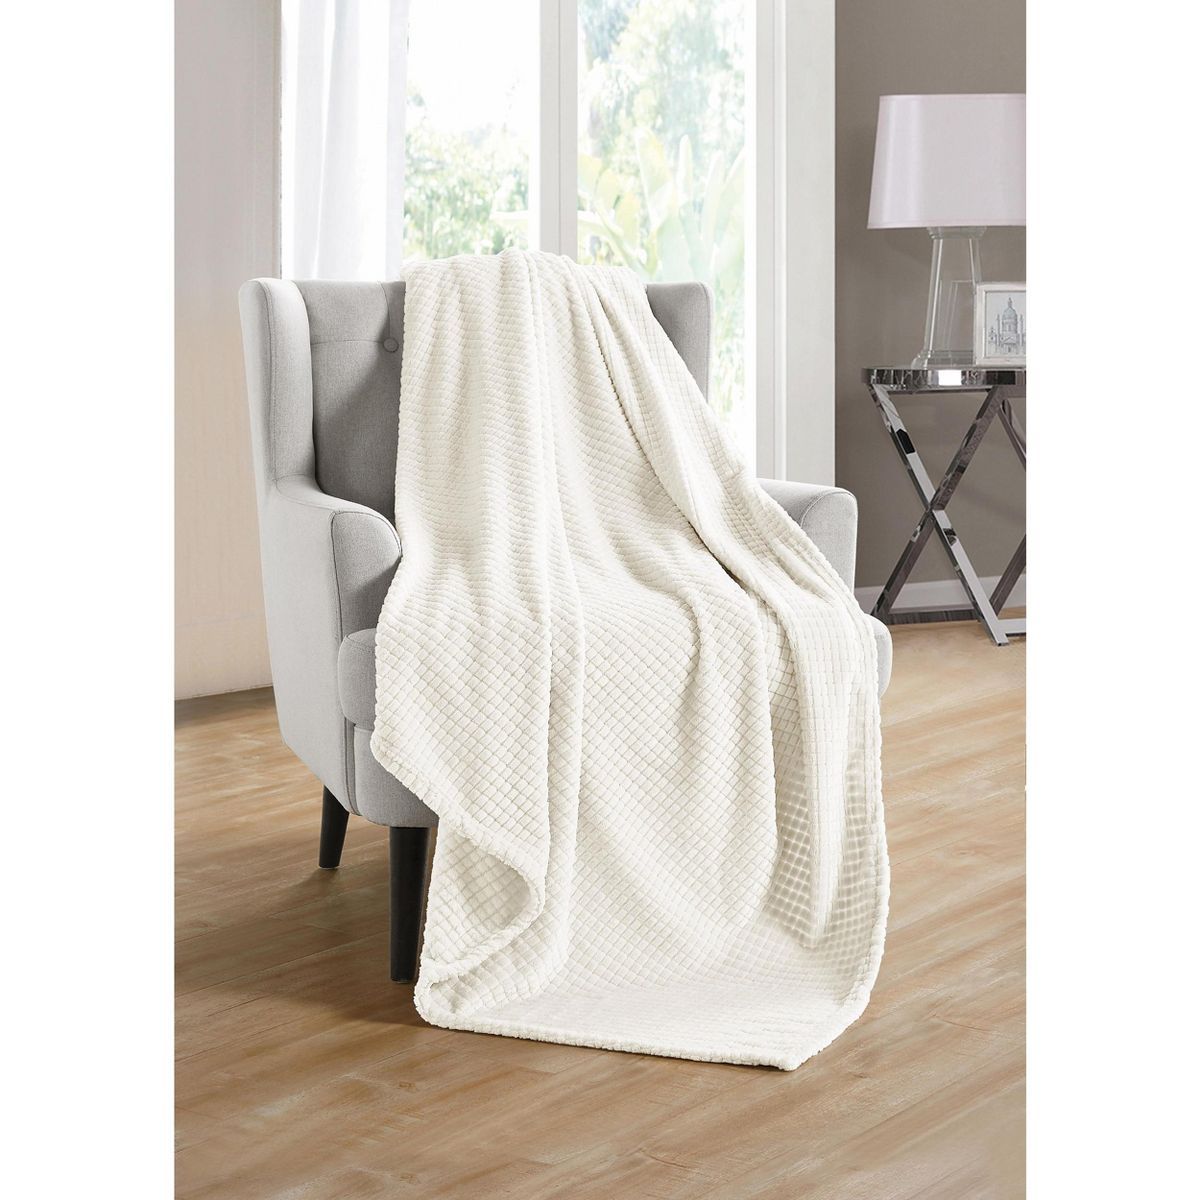 Kate Aurora Living Ultra Soft And Plush Tufted Hypoallergenic Fleece Throw Blanket Covers | Target